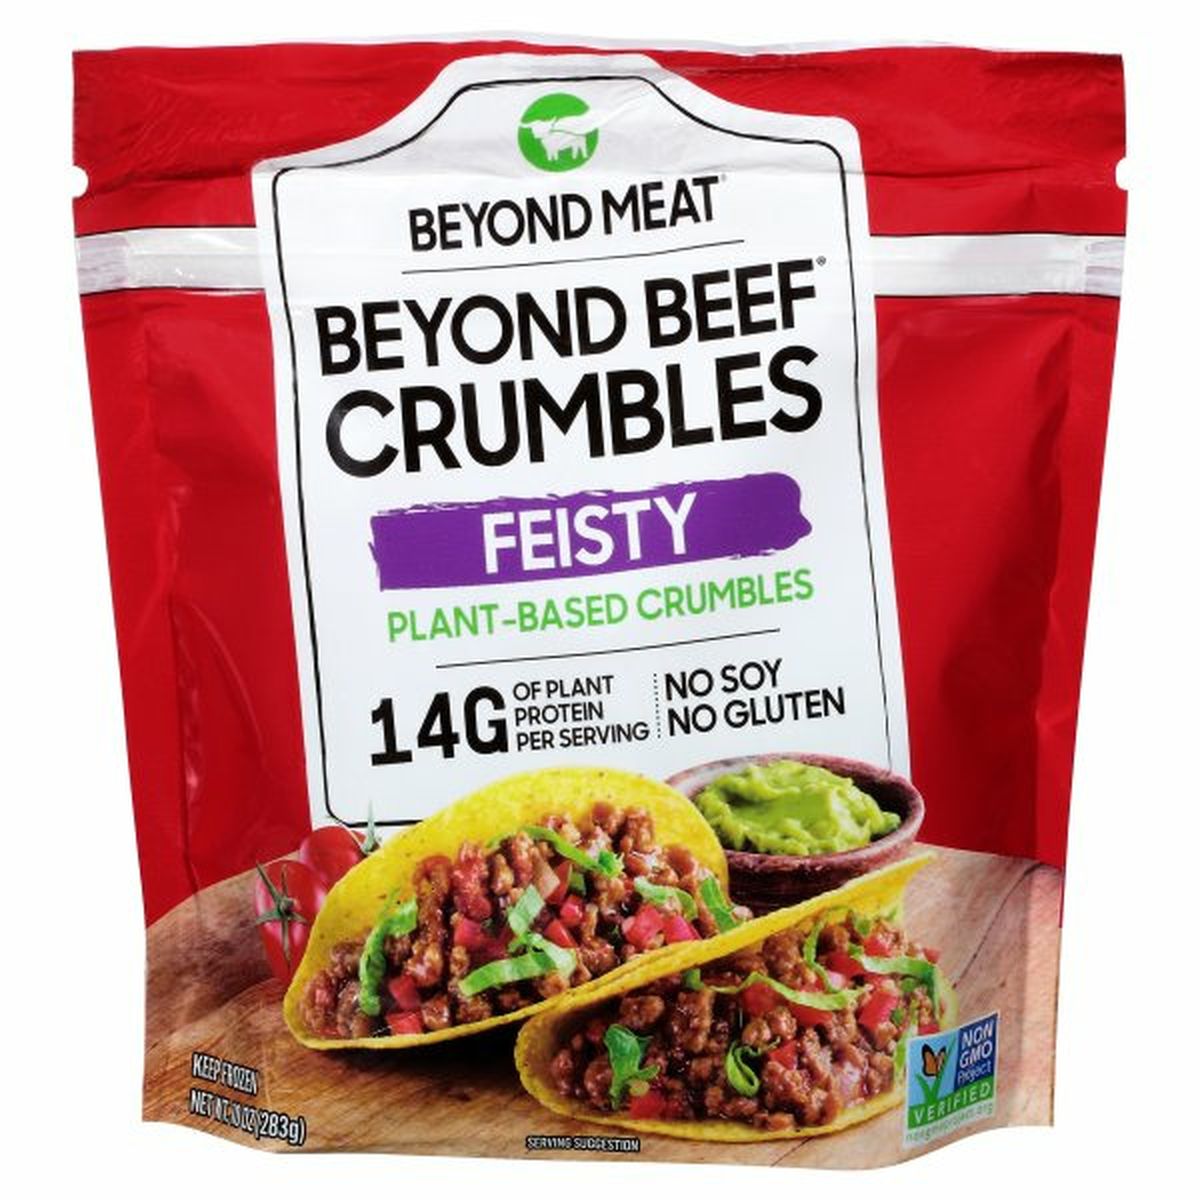 Calories in Beyond Meat Beyond Beef Crumbles, Plant-Based, Feisty